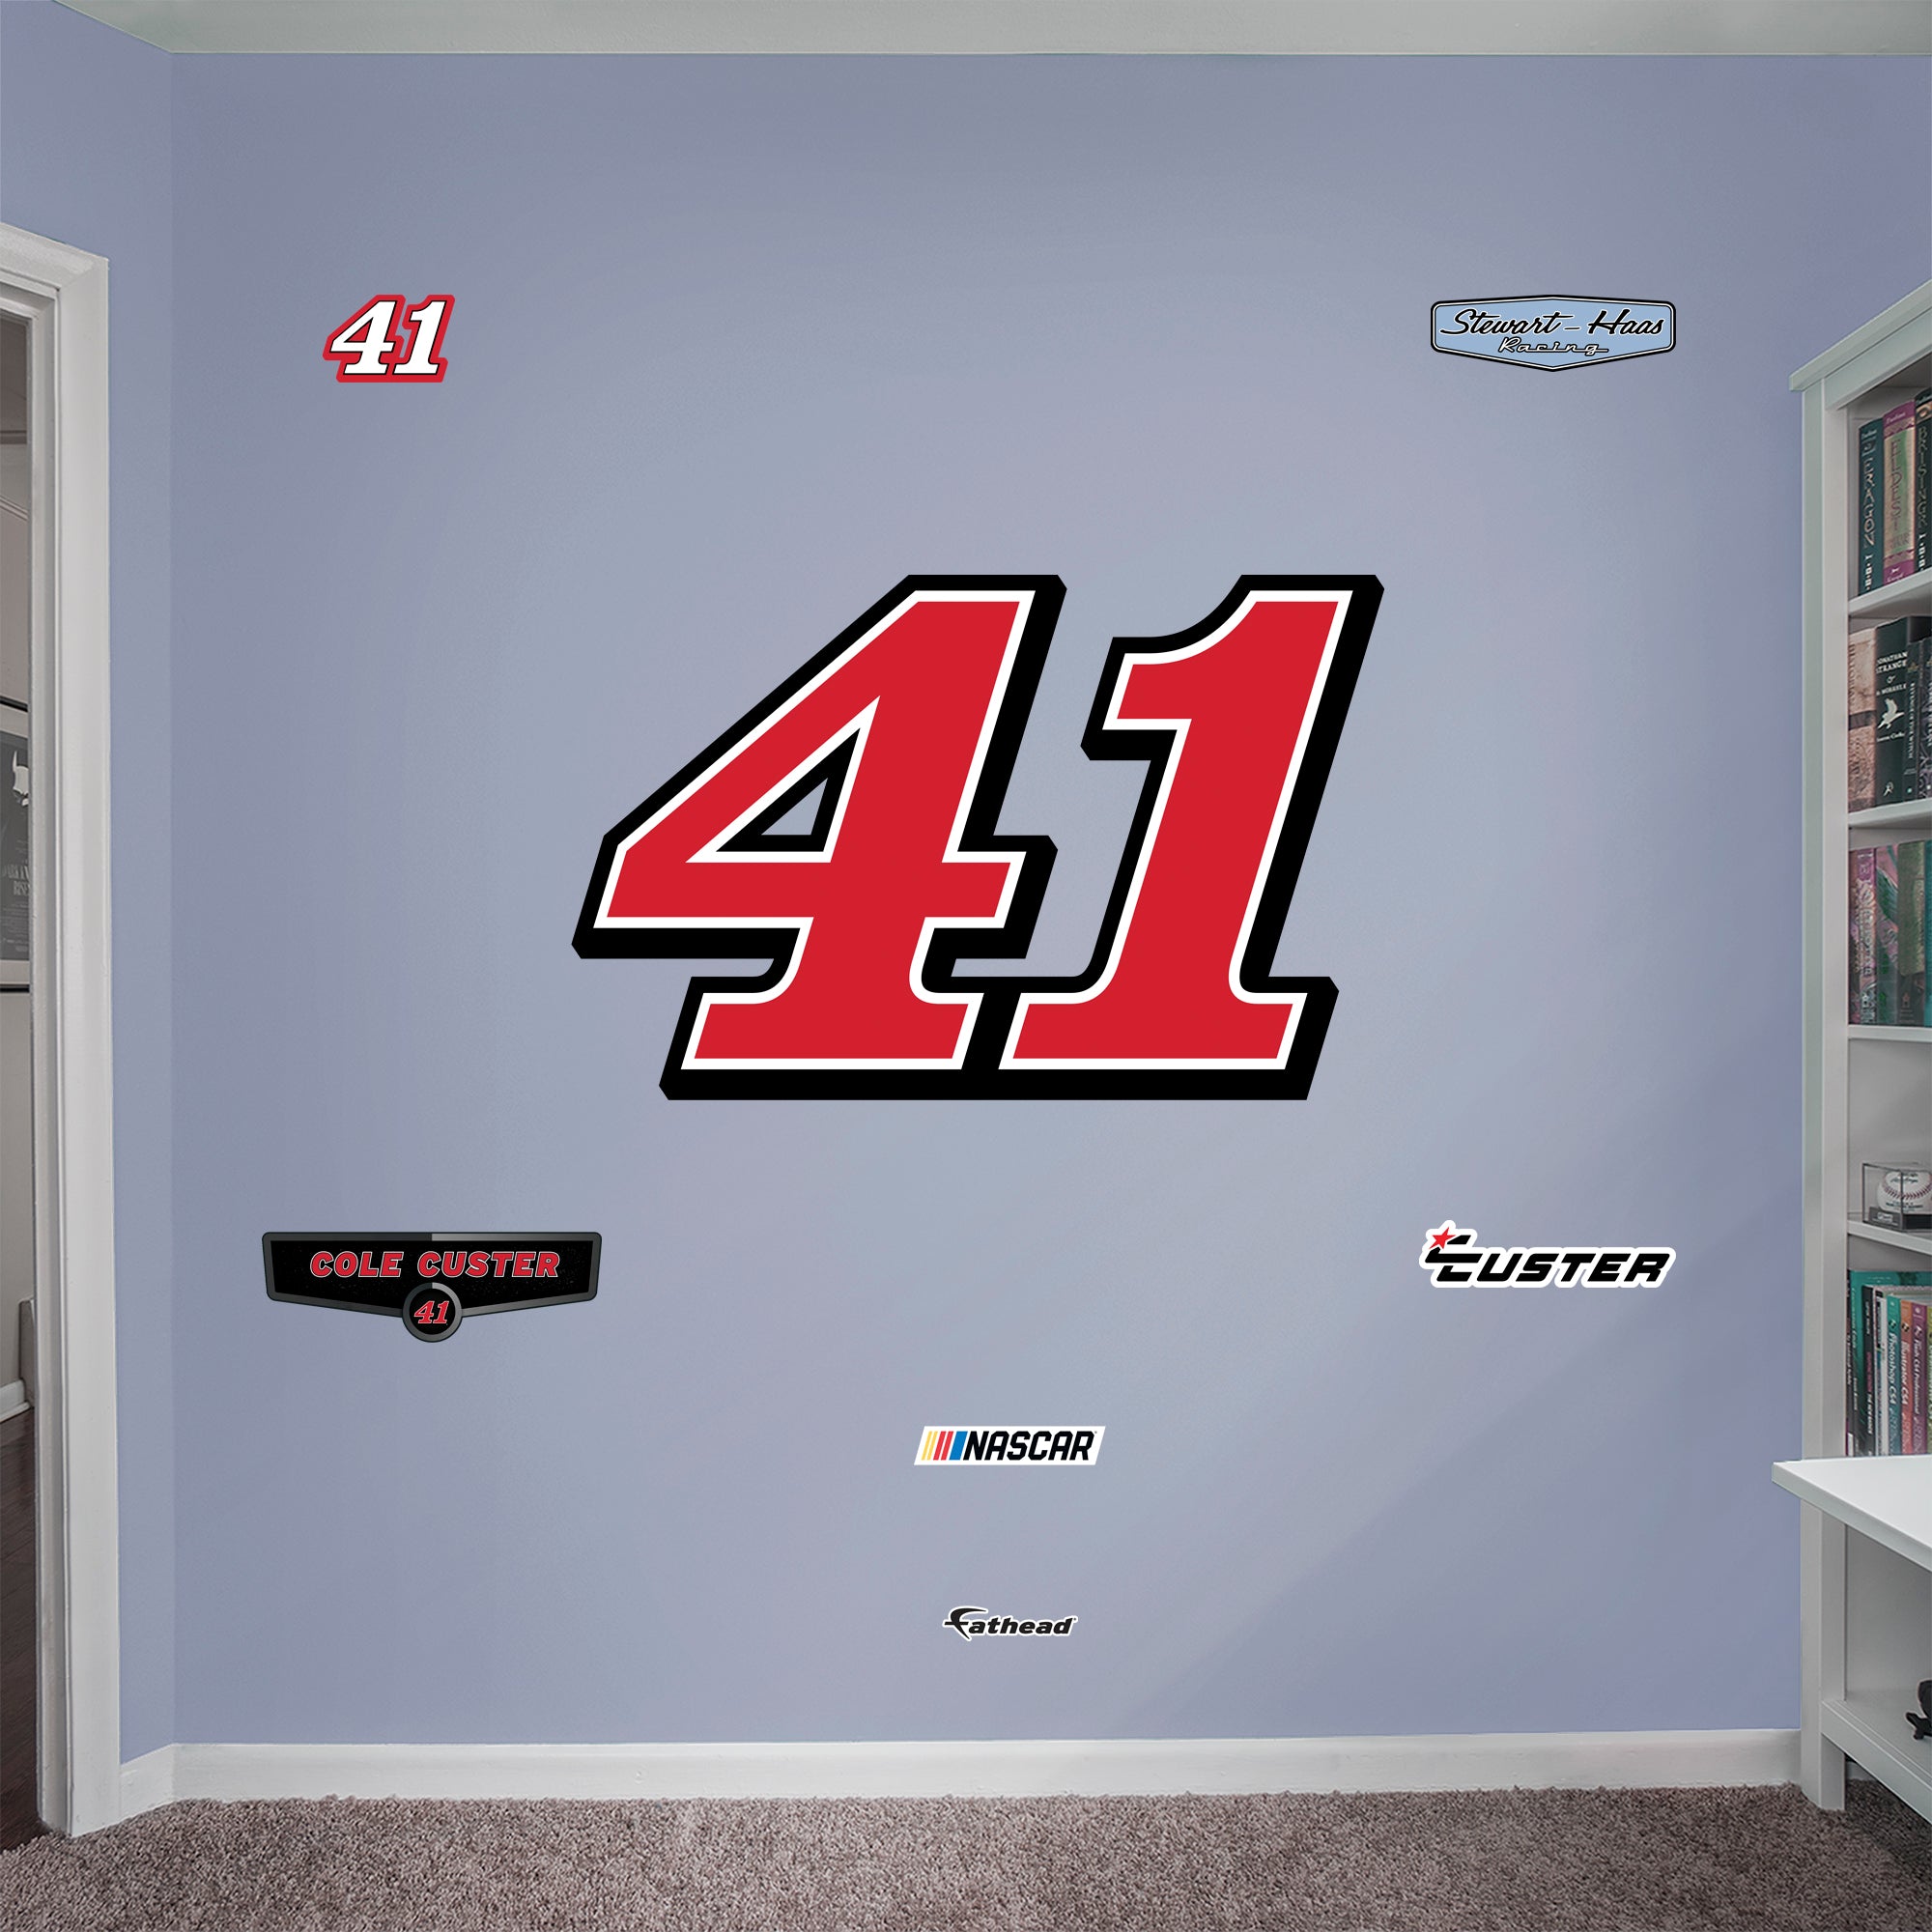 Cole Custer 2021 #41 Logo - Officially Licensed NASCAR Removable Wall Decal Giant Logo + 2 Decals (30"W x 47"H) by Fathead | Vin